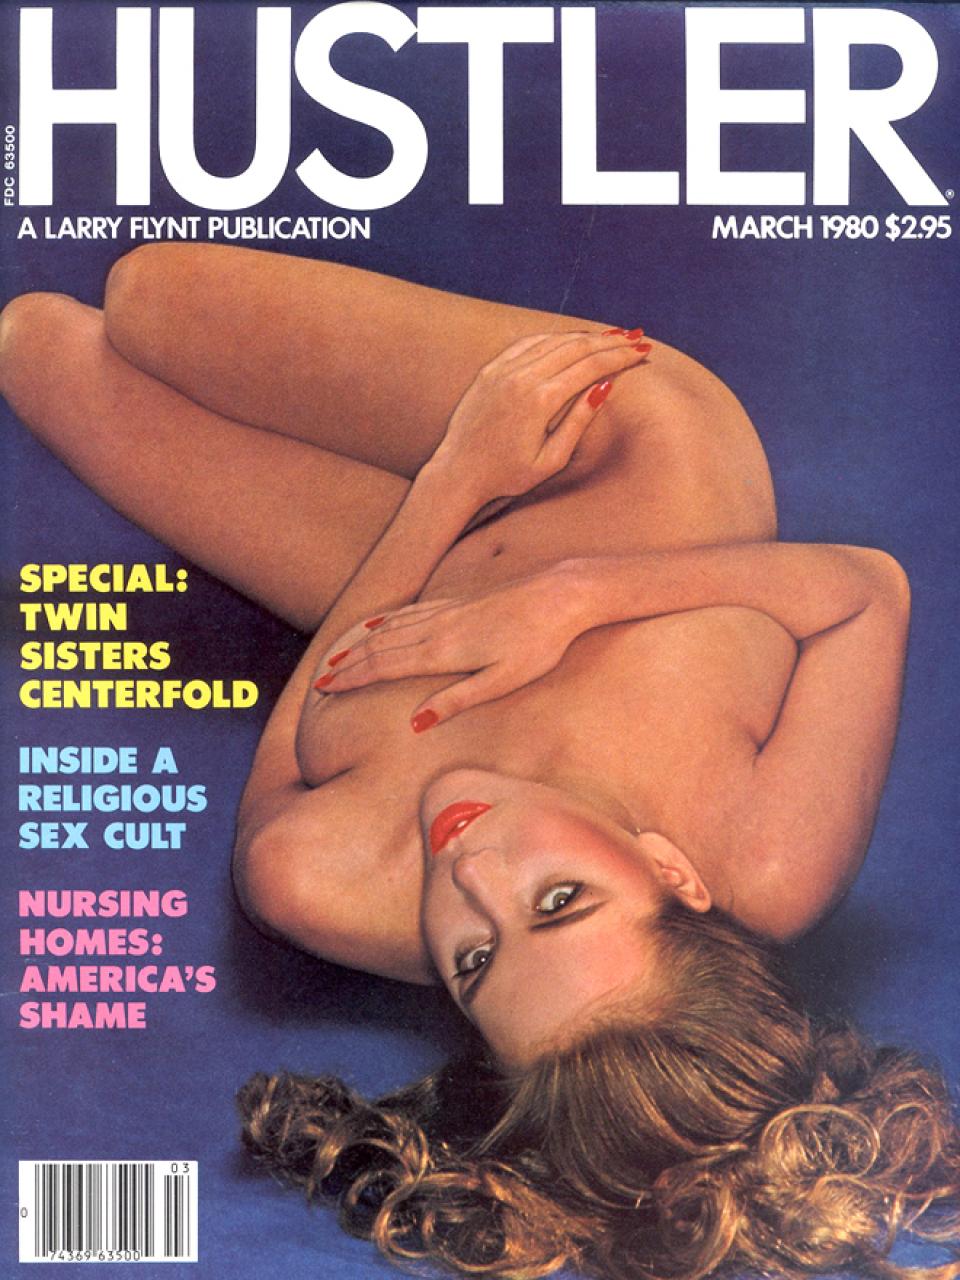 Browse HUSTLER Magazine's March 1980 Issue Featuring March's HUST...